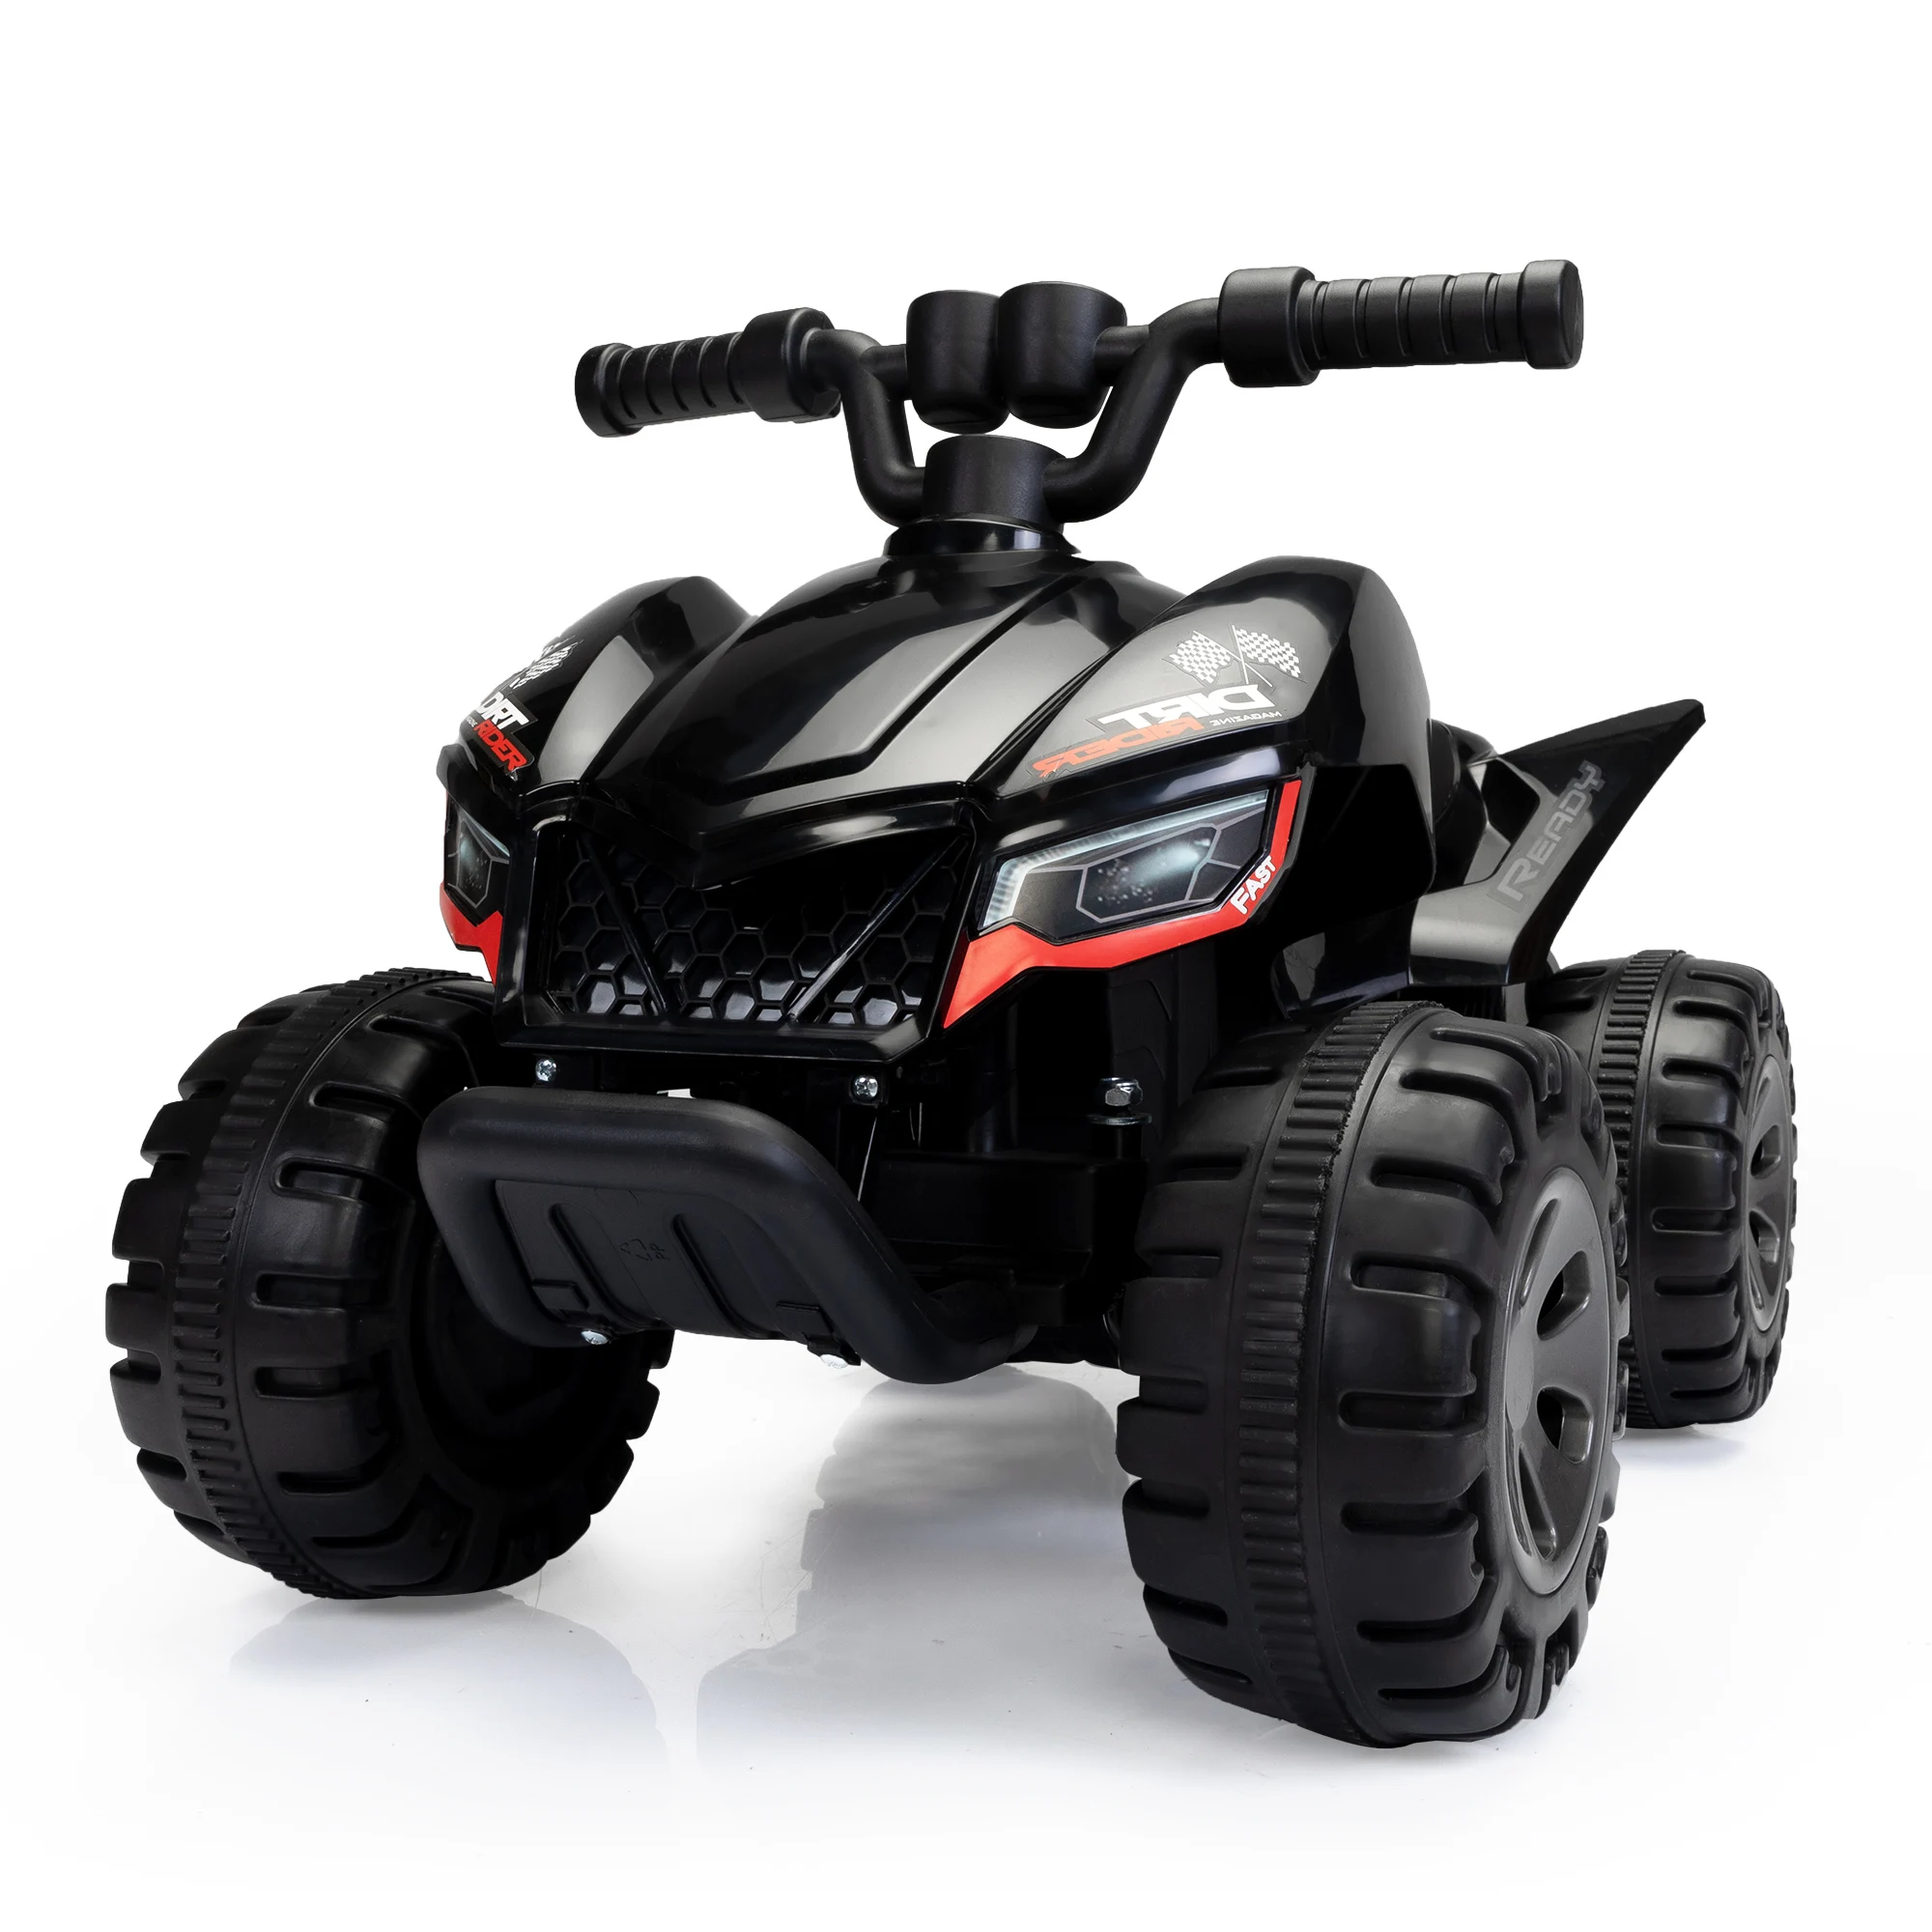 

Kids Ride-on ATV, 6V Battery Powered Electric Quad Car with Music, LED Lights and Spray Device, 4 Wheeled Ride-on Toy for Toddle